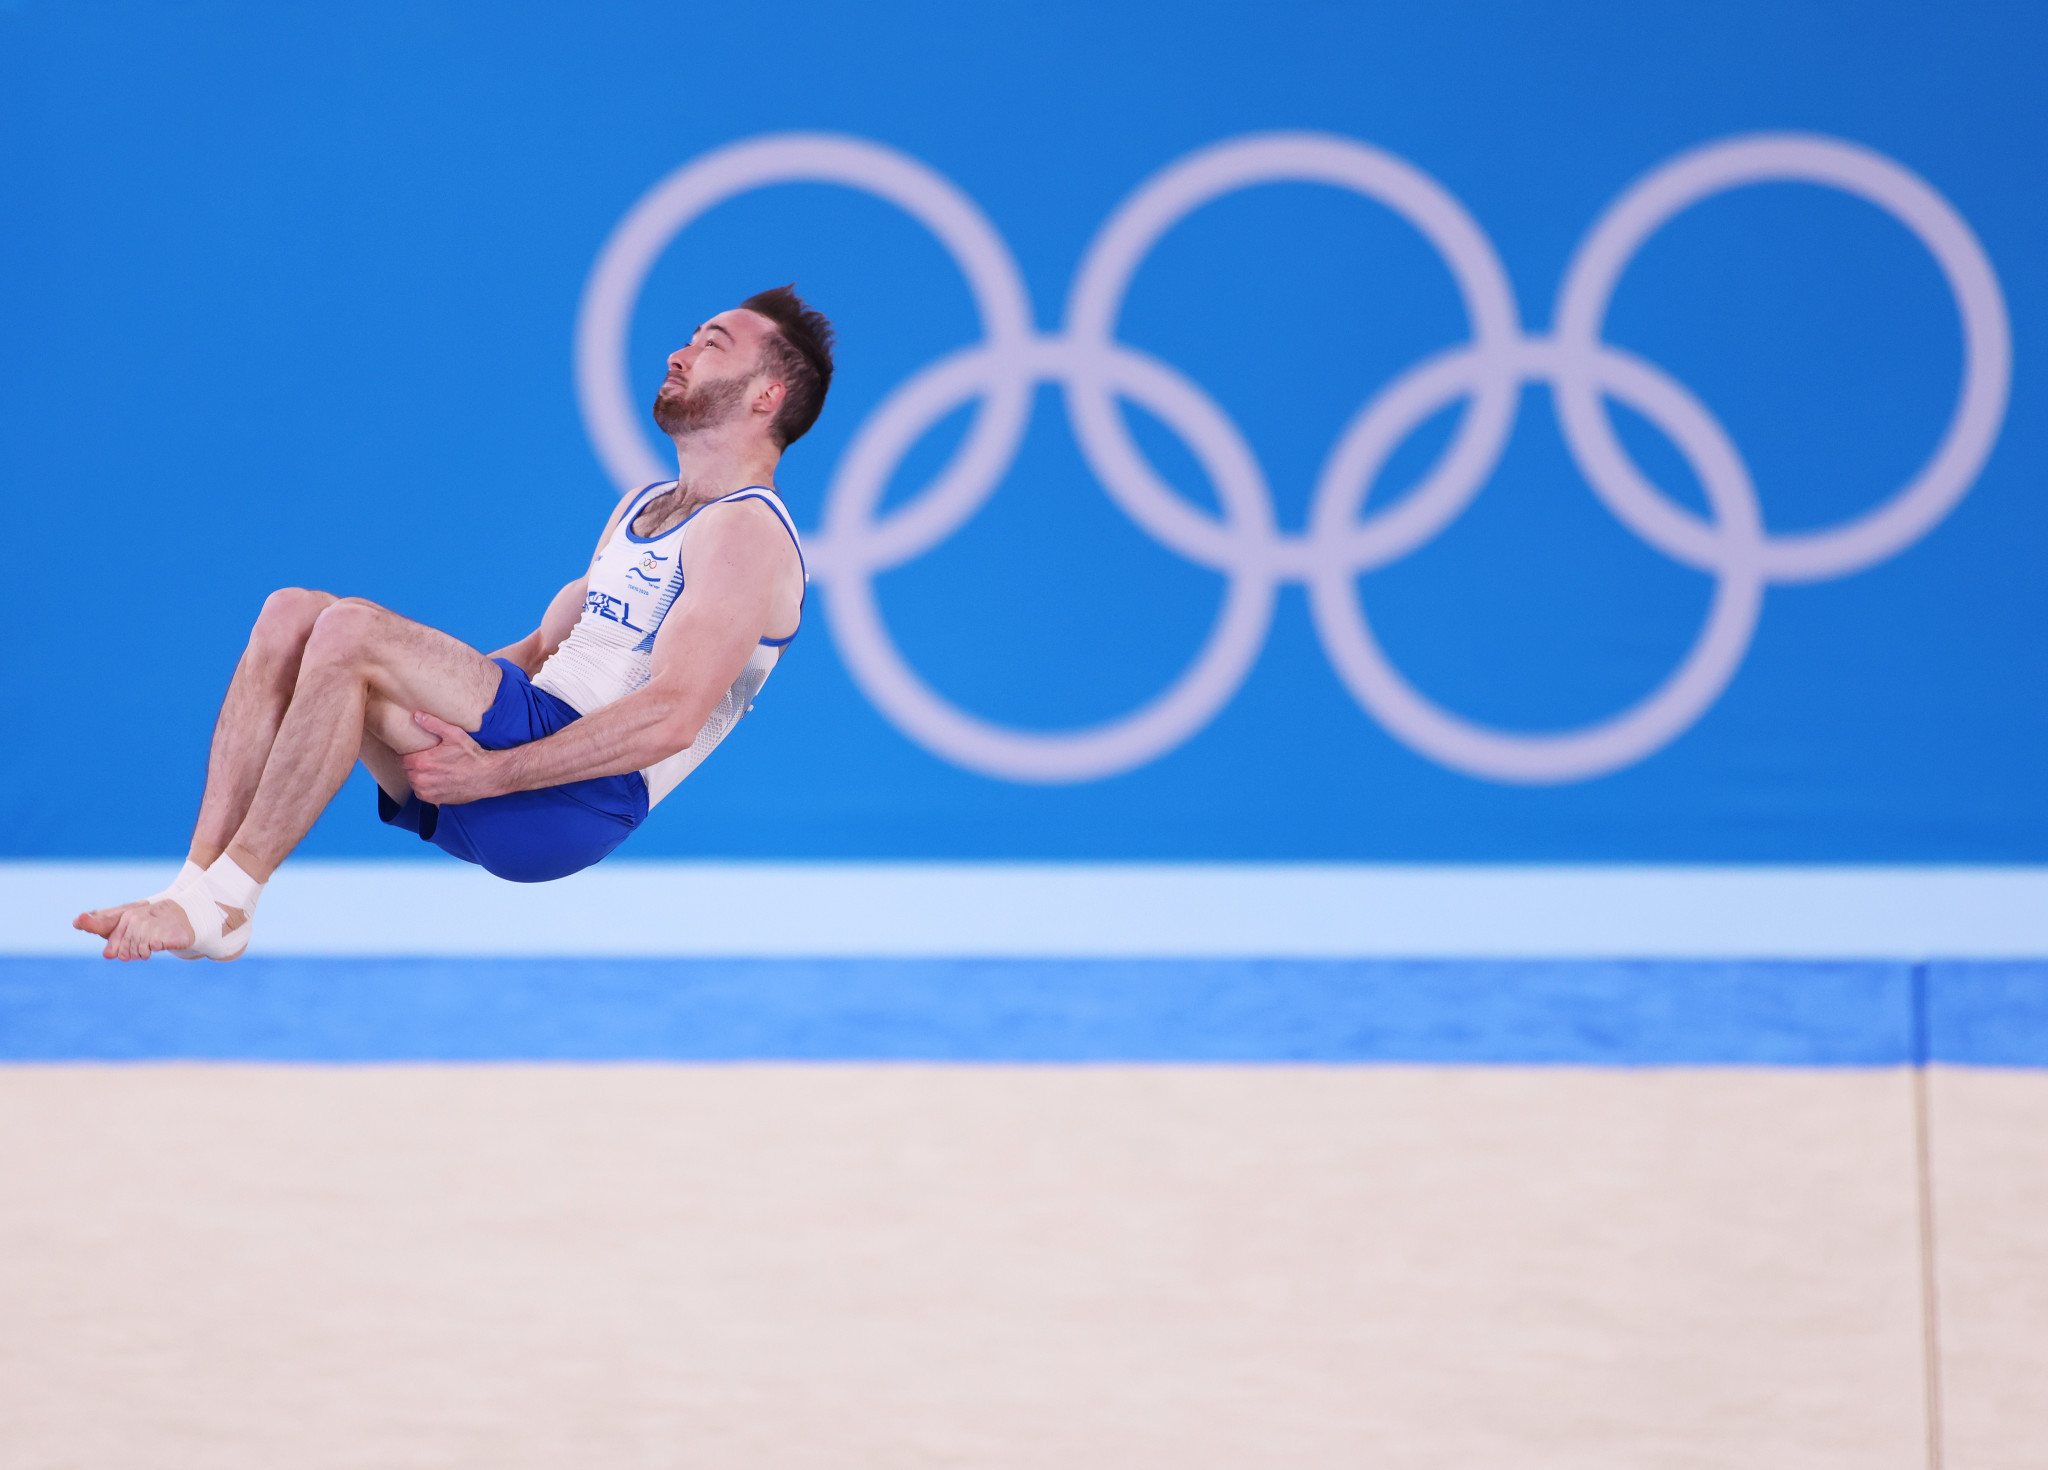 Dolgopyat set for first competition since Tokyo 2020 gold at FIG Apparatus World Cup in Cottbus